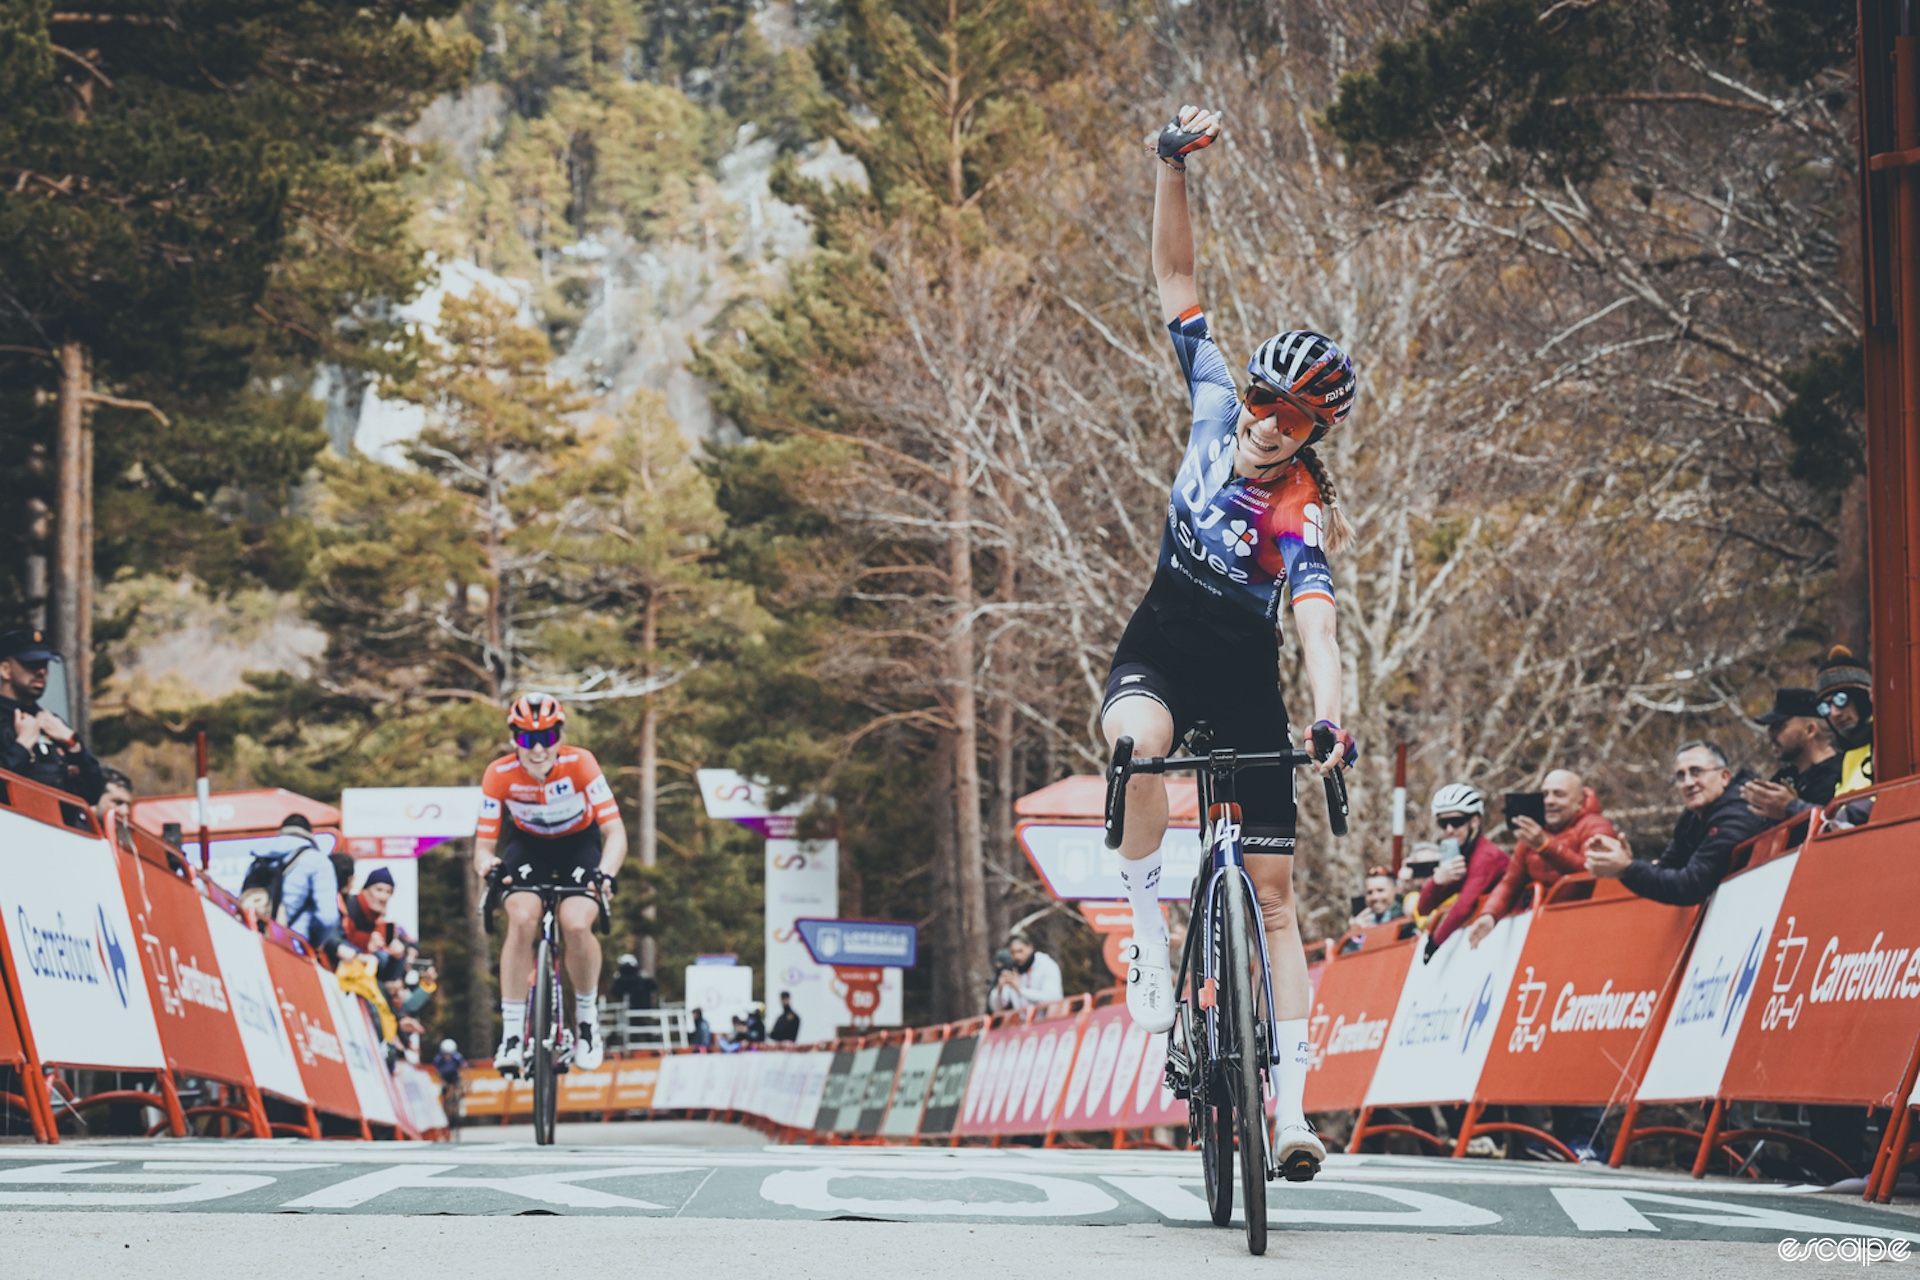 Evita Muzic raises her arm as she wins the sixth stage of La Vuelta, Demi Vollering grimaces in the background.